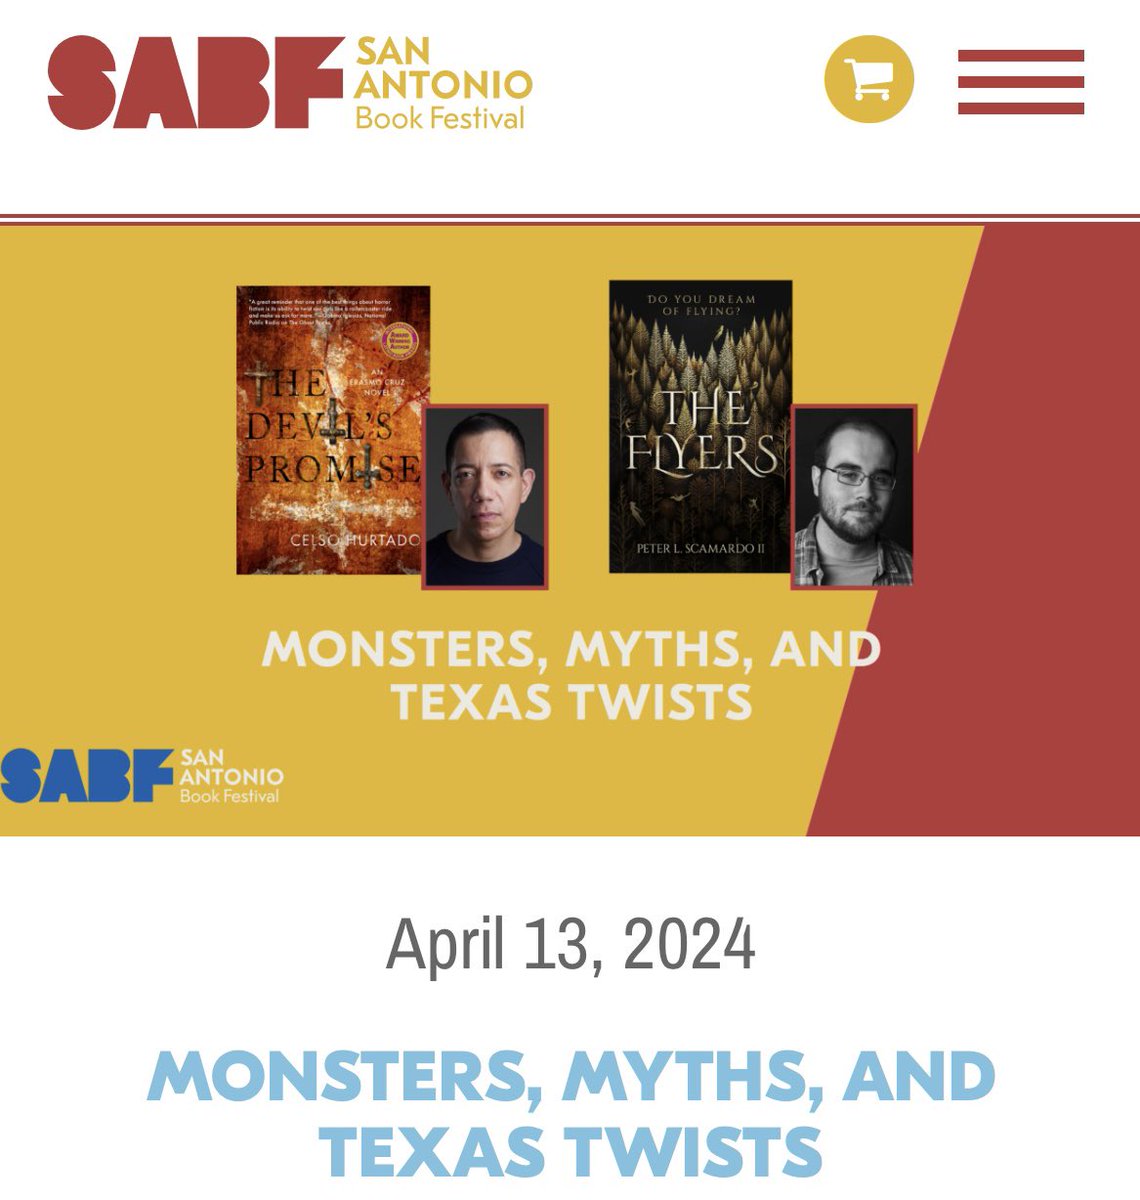 It’s officially San Antonio Book Festival week! Come join @CelsoHurtadoJr and I at 12:30pm on Saturday as we talk all things Monsters, Myths, & Texas Twists. Happy reading! @SABookFestival sabookfestival.org/schedule-event…